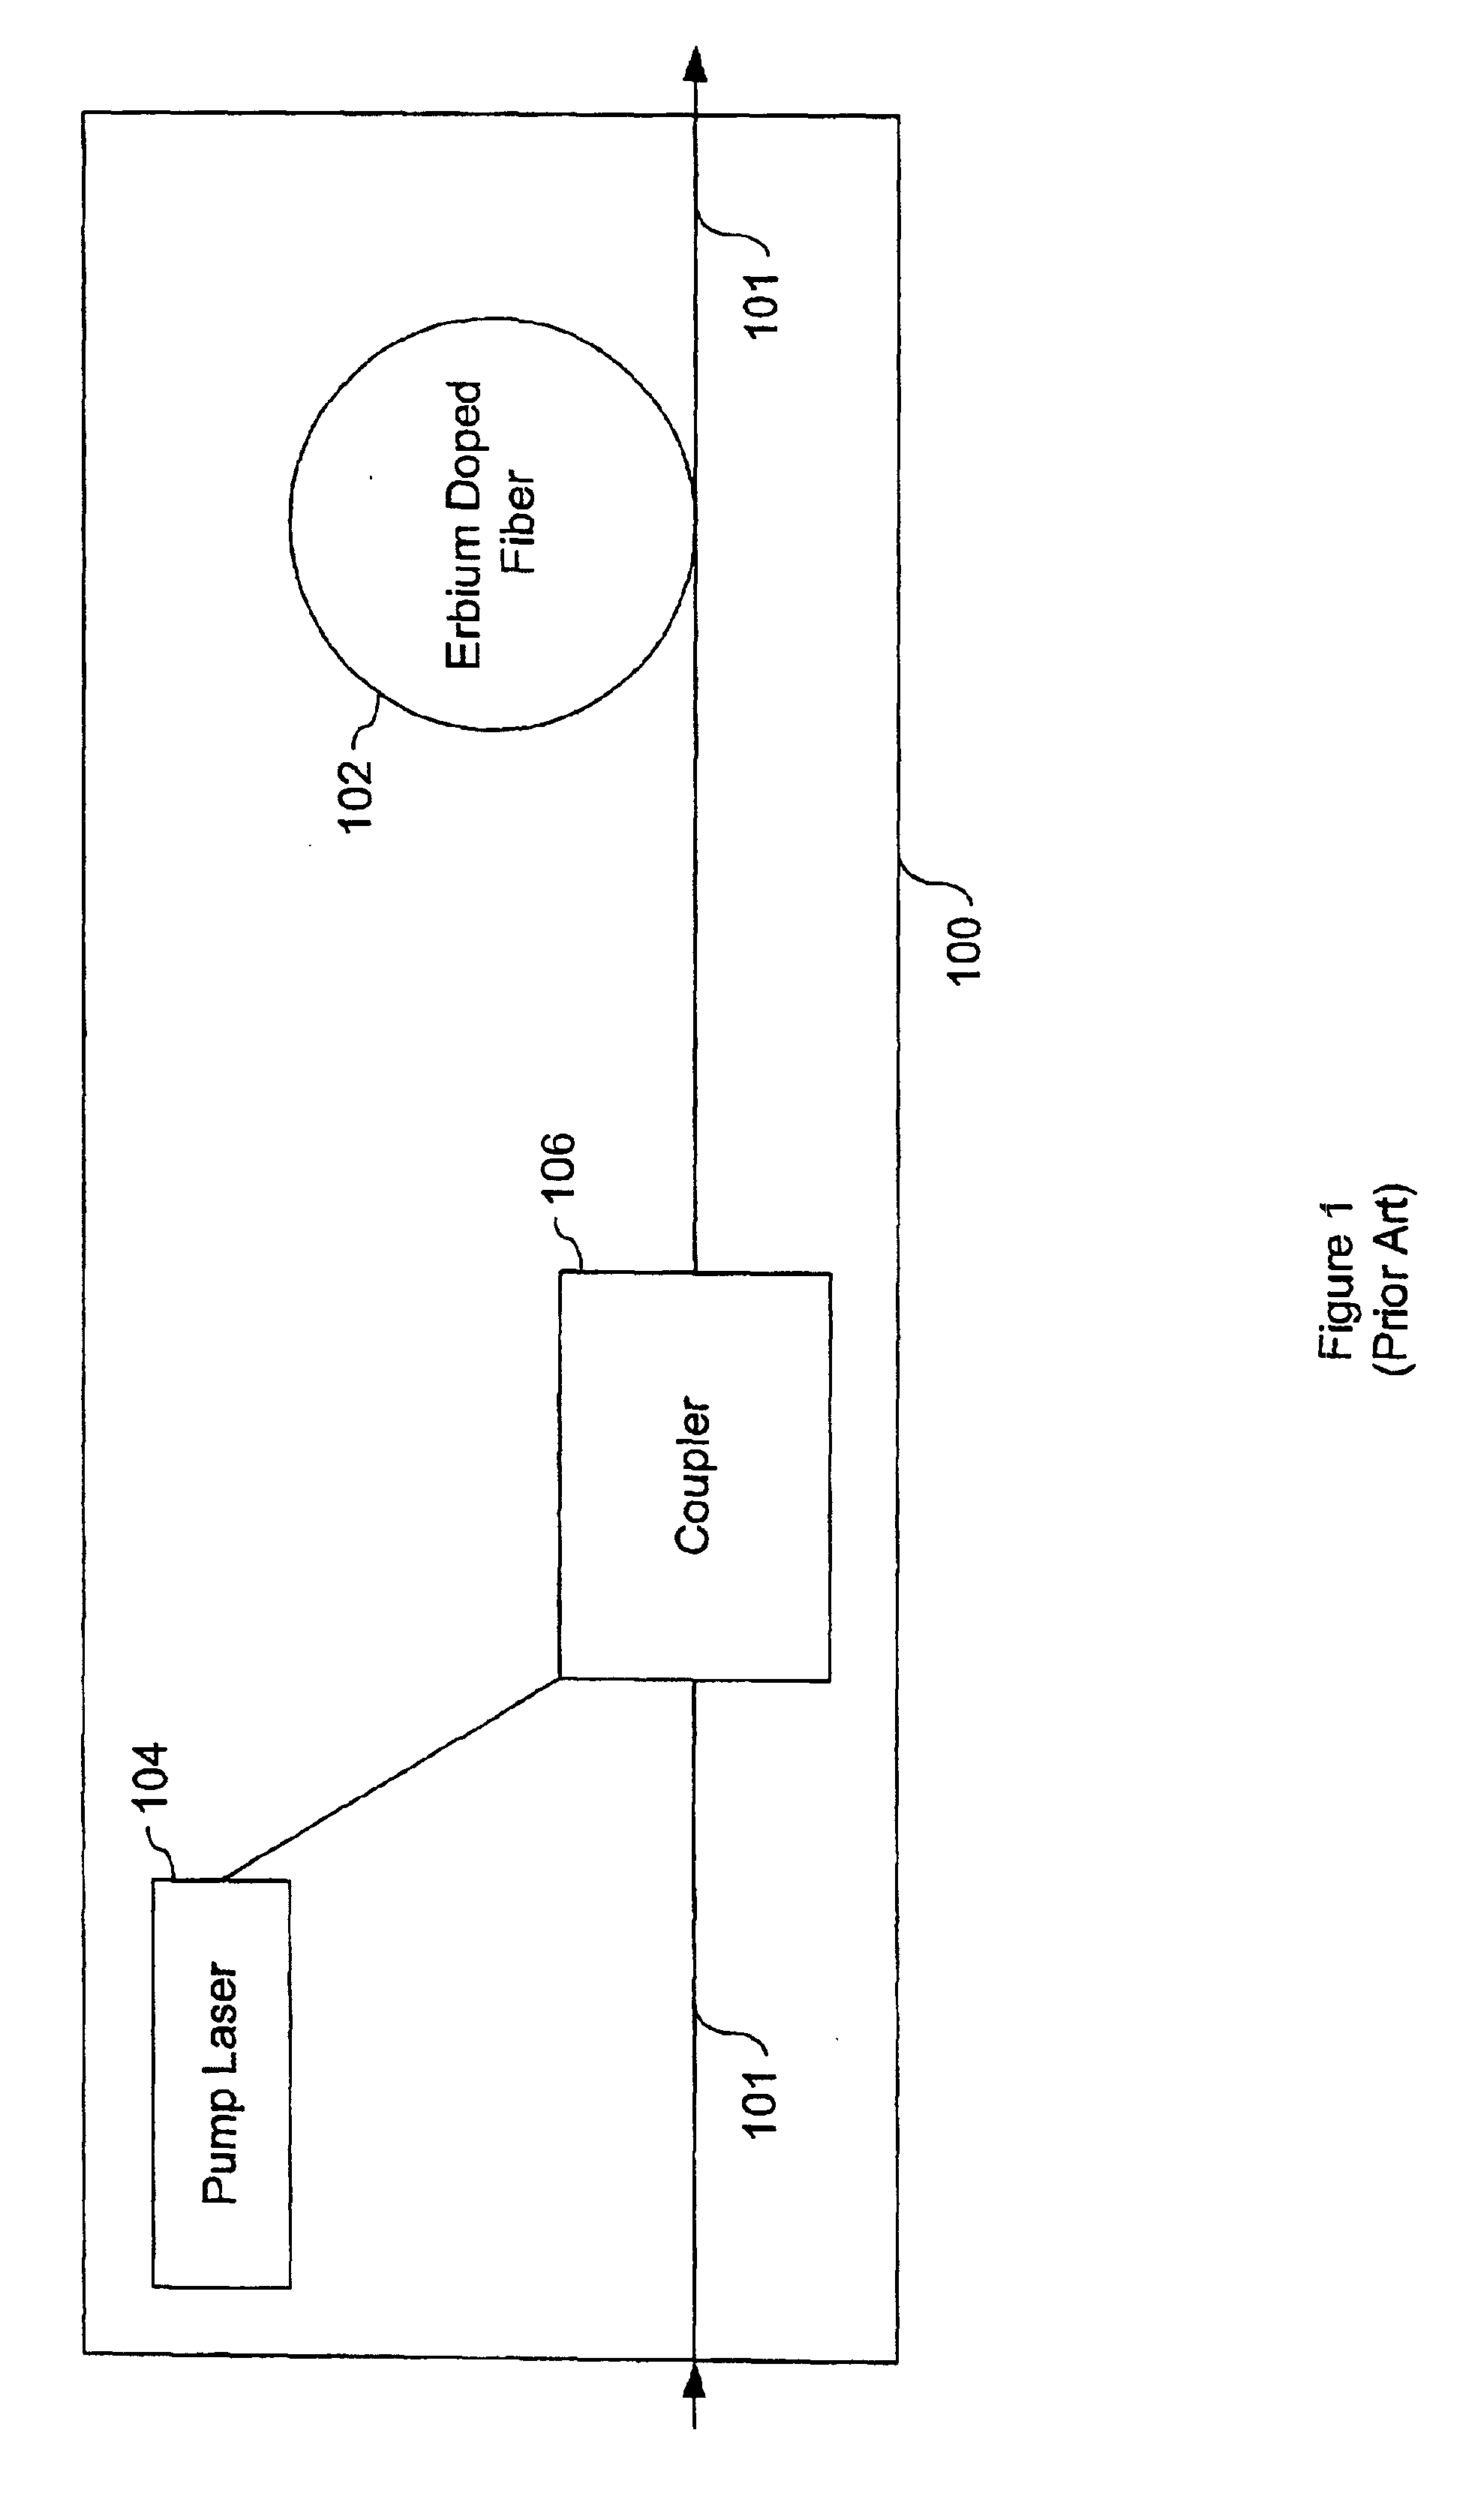 Lasing semiconductor optical amplifier with output power monitor and control